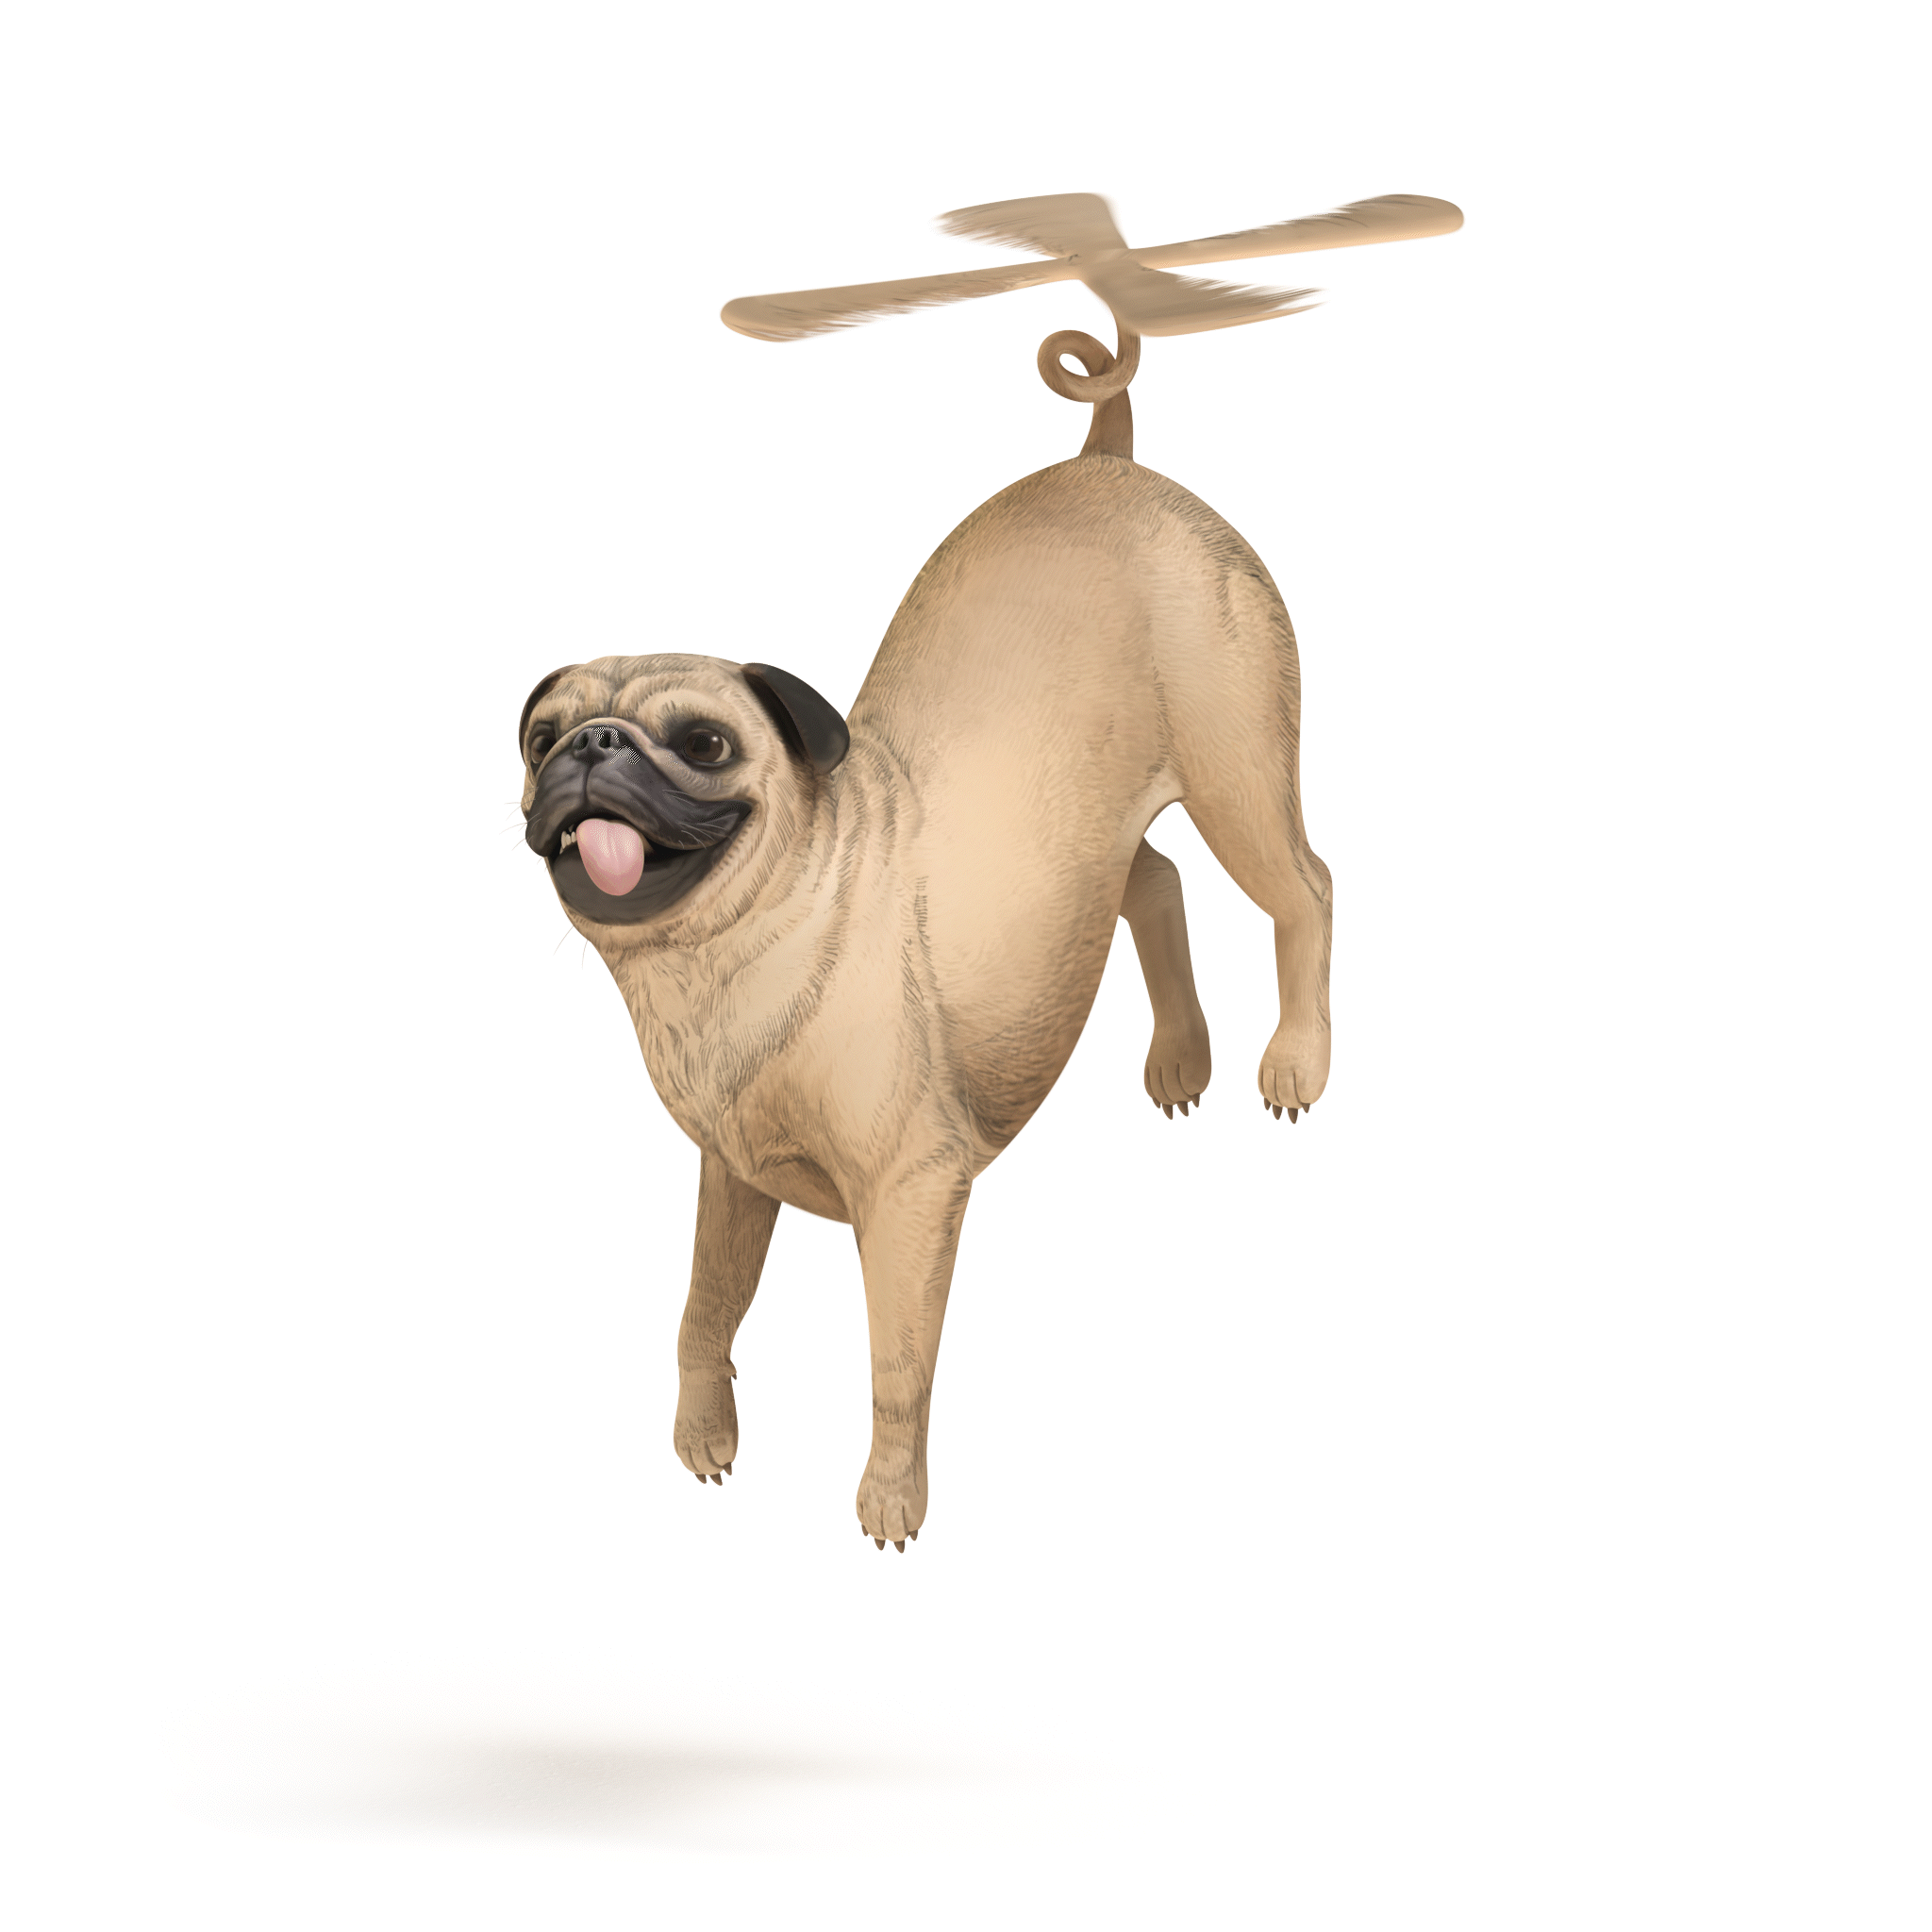 Pugasus Propellus - a flying pug; an animated image of a pug using its helicopter tail to fly